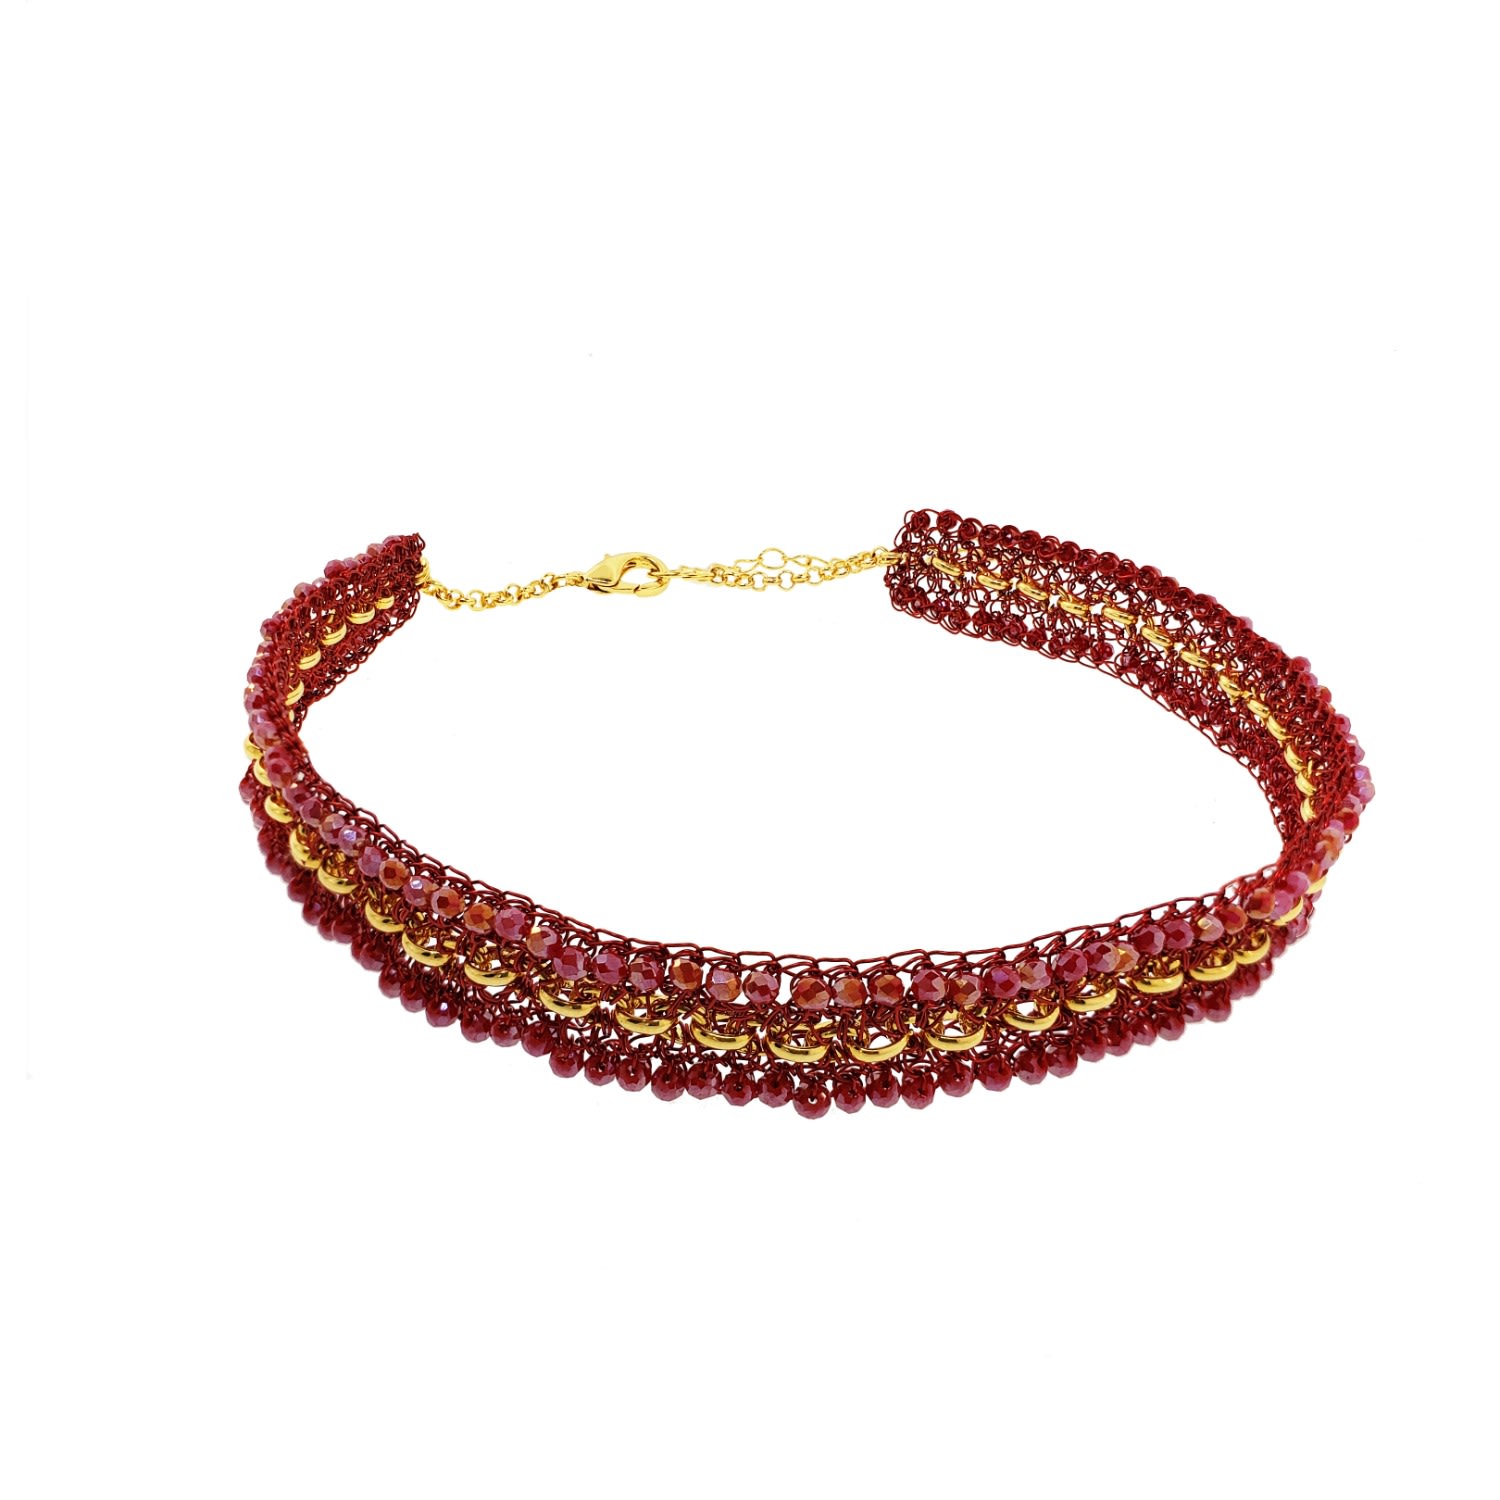 Women’s Gold / Red Red & Gold Flux Handmade Crochet Chocker Necklace Lavish by Tricia Milaneze